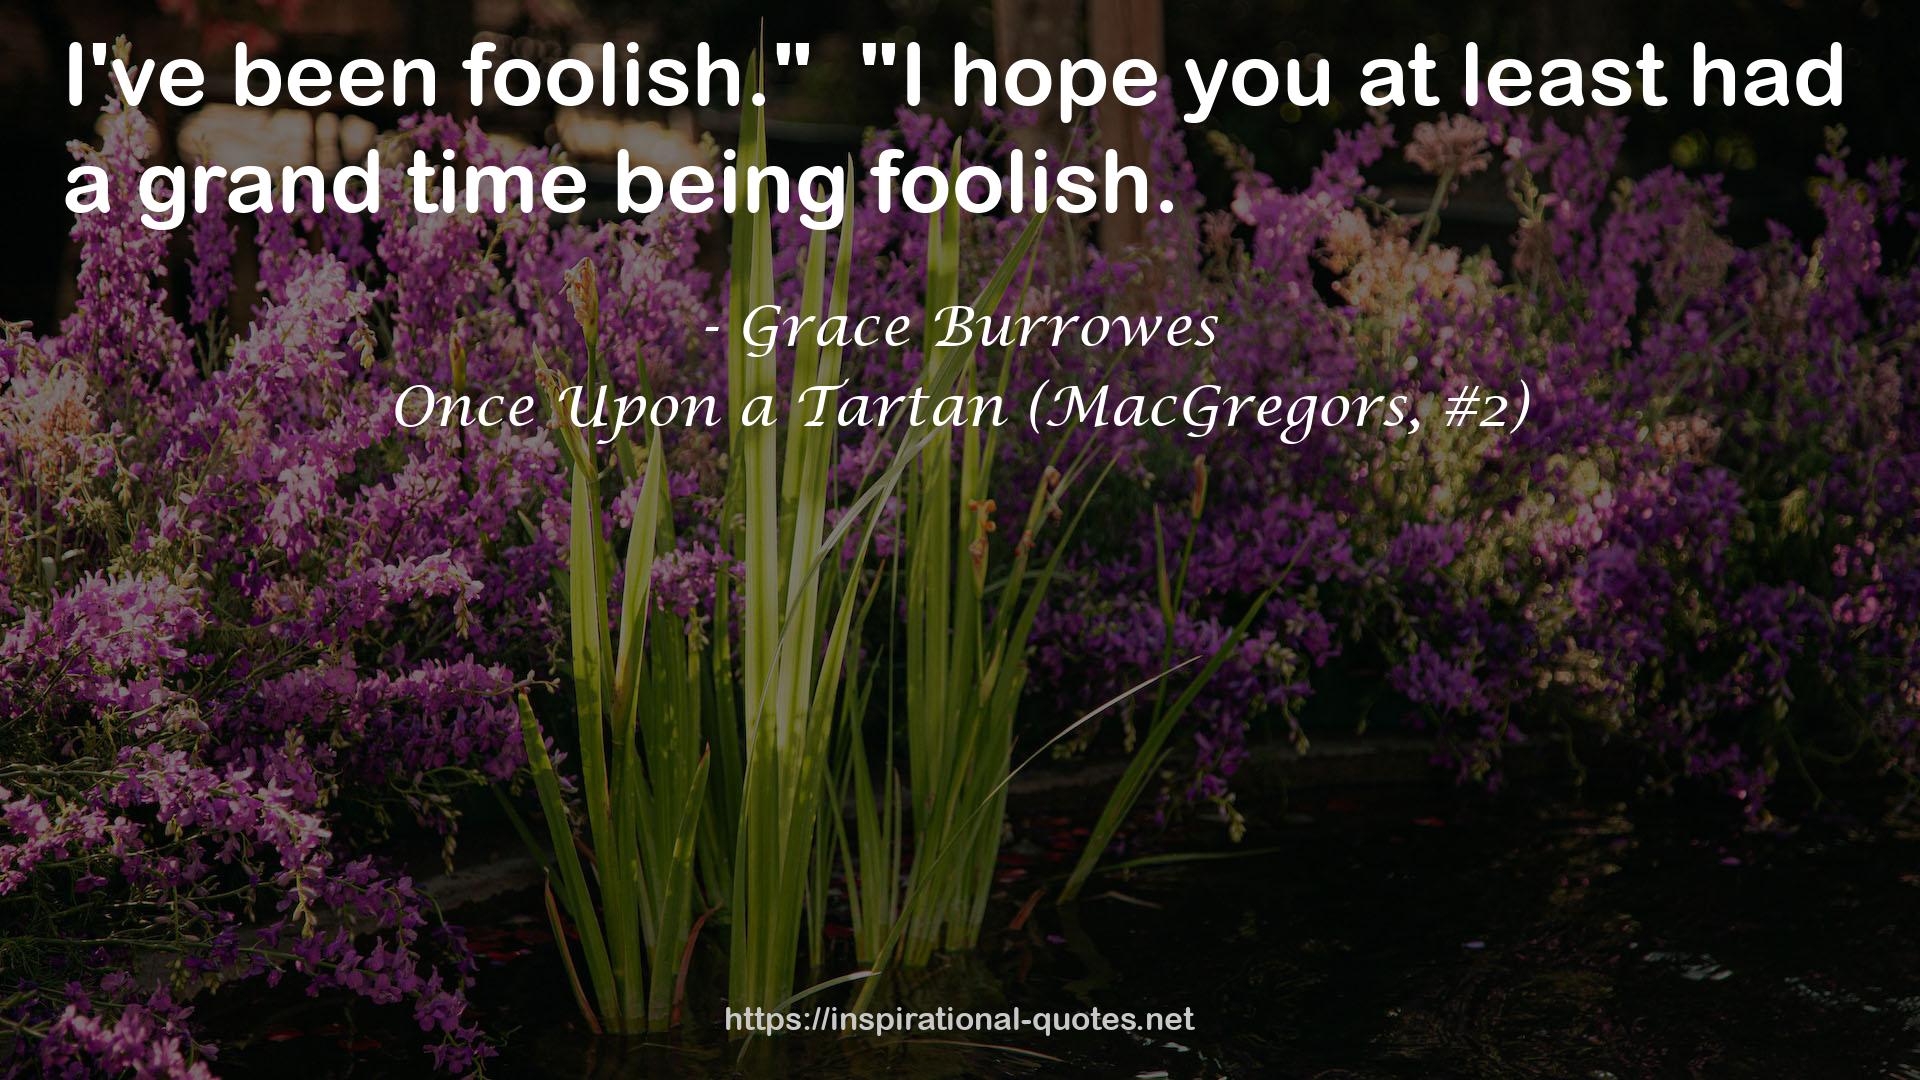 Once Upon a Tartan (MacGregors, #2) QUOTES